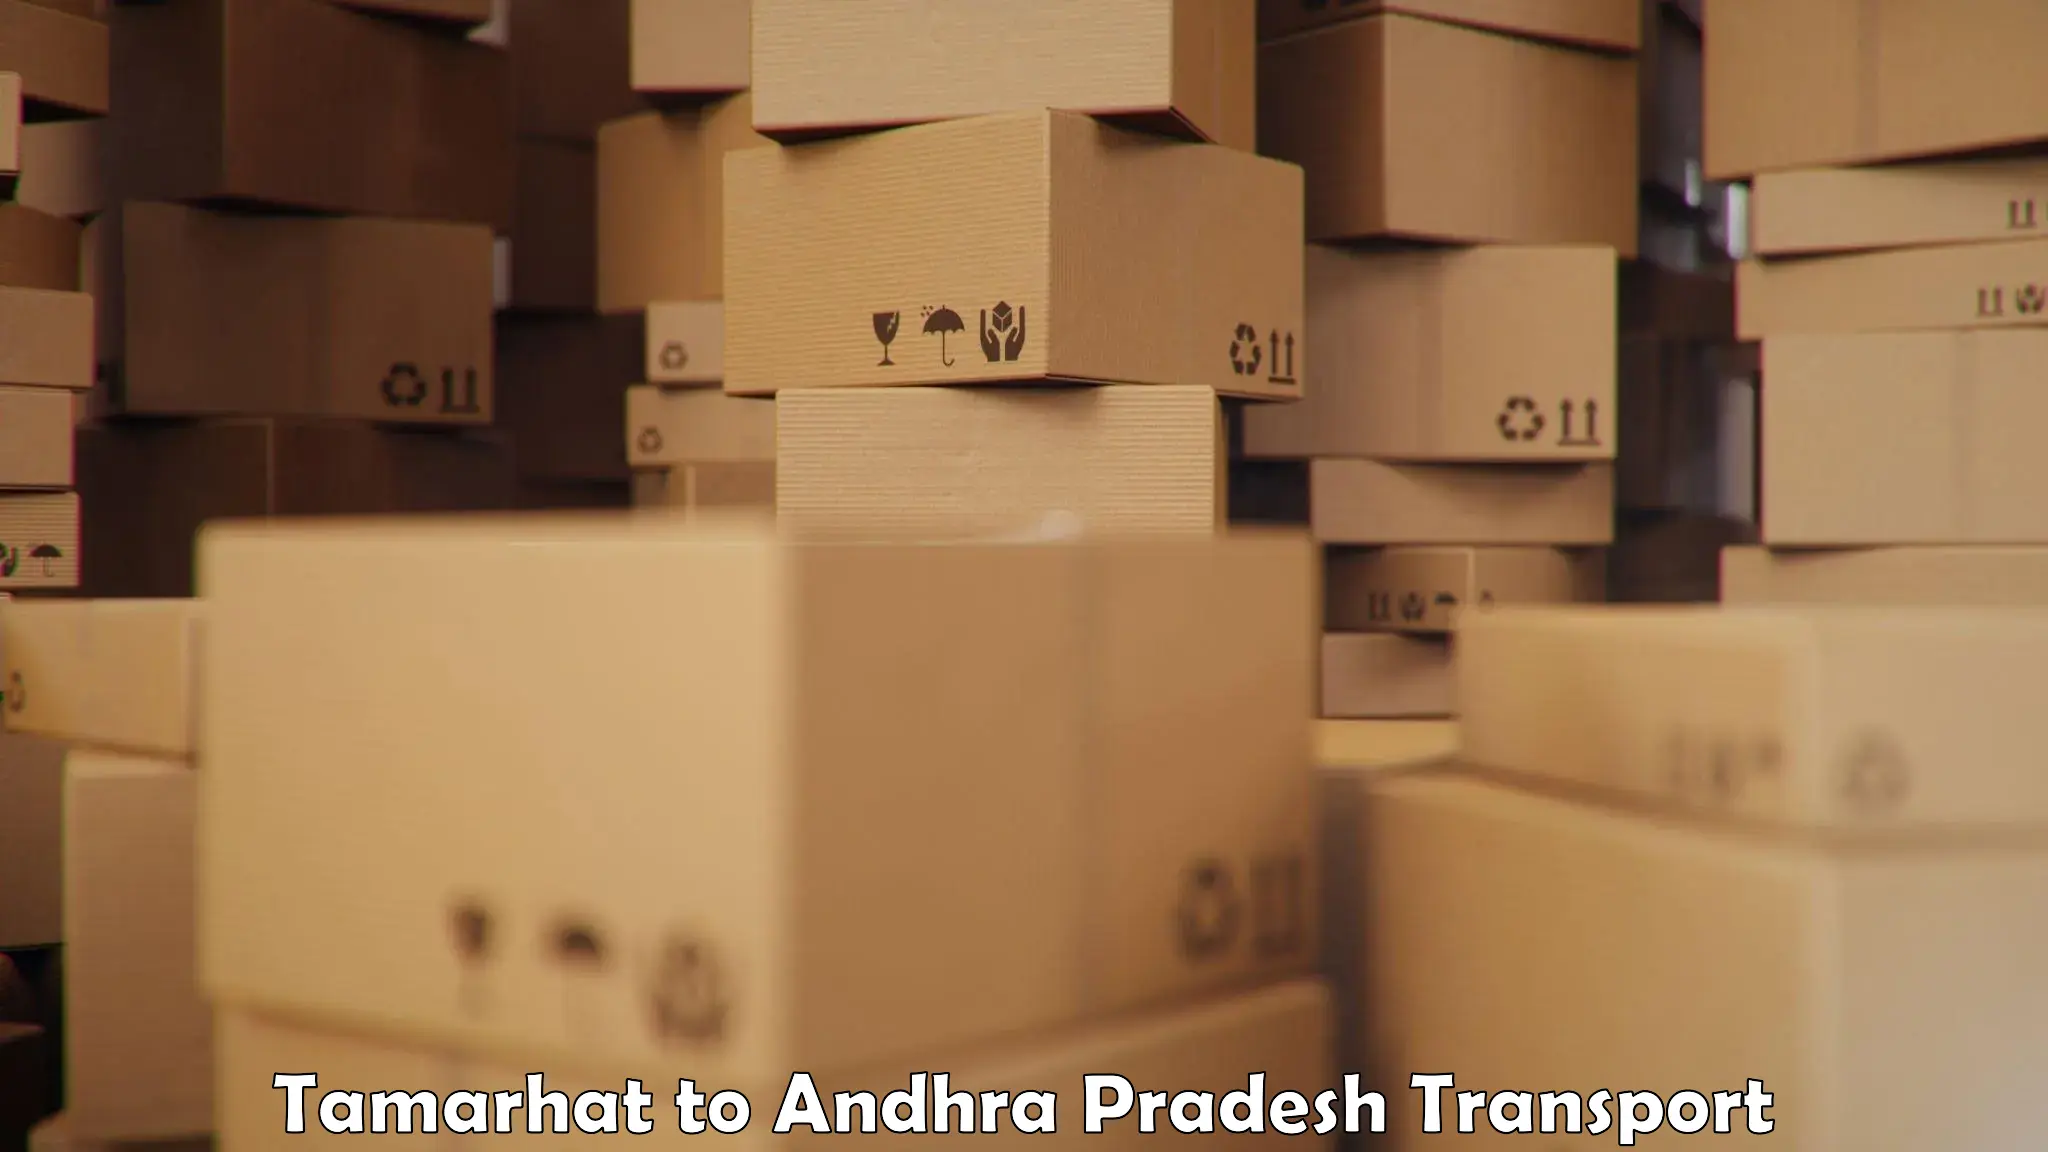 Transport shared services Tamarhat to Anantapur